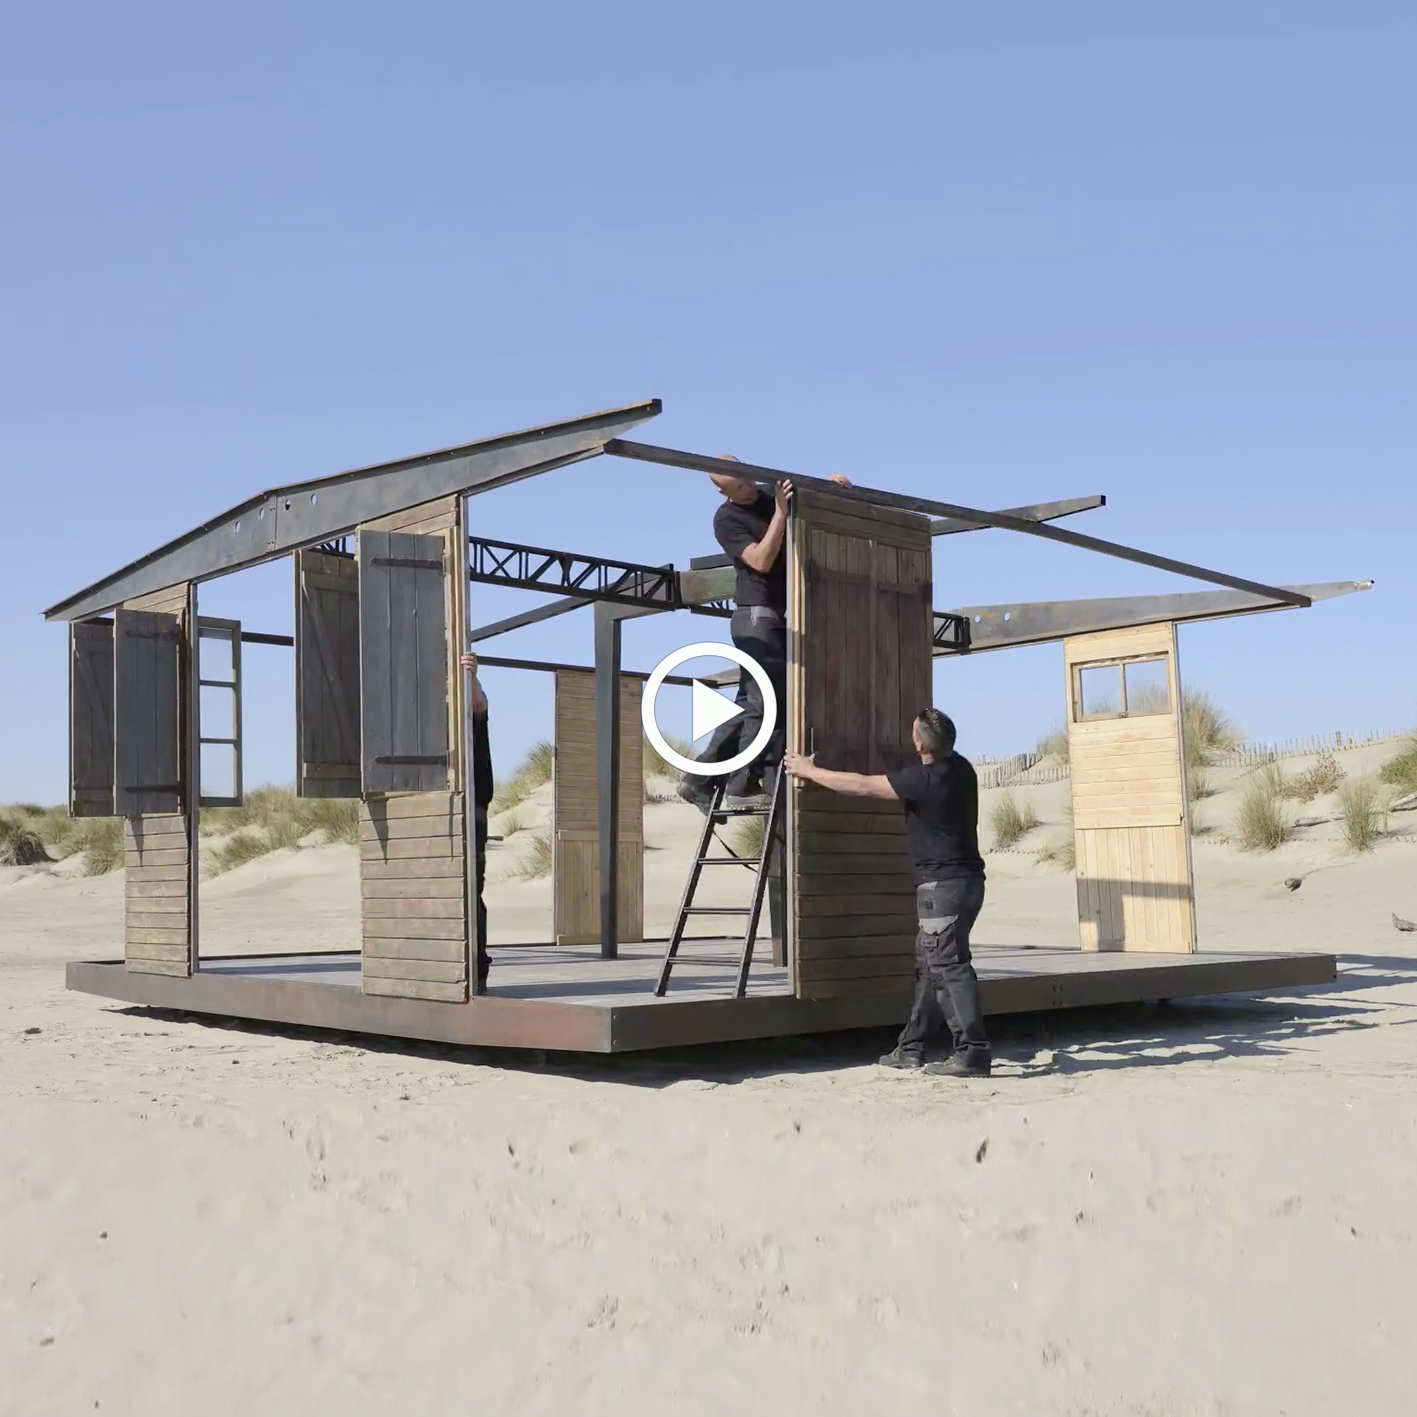 6x6 Demountable house reassembled in the Camargue, 2014.